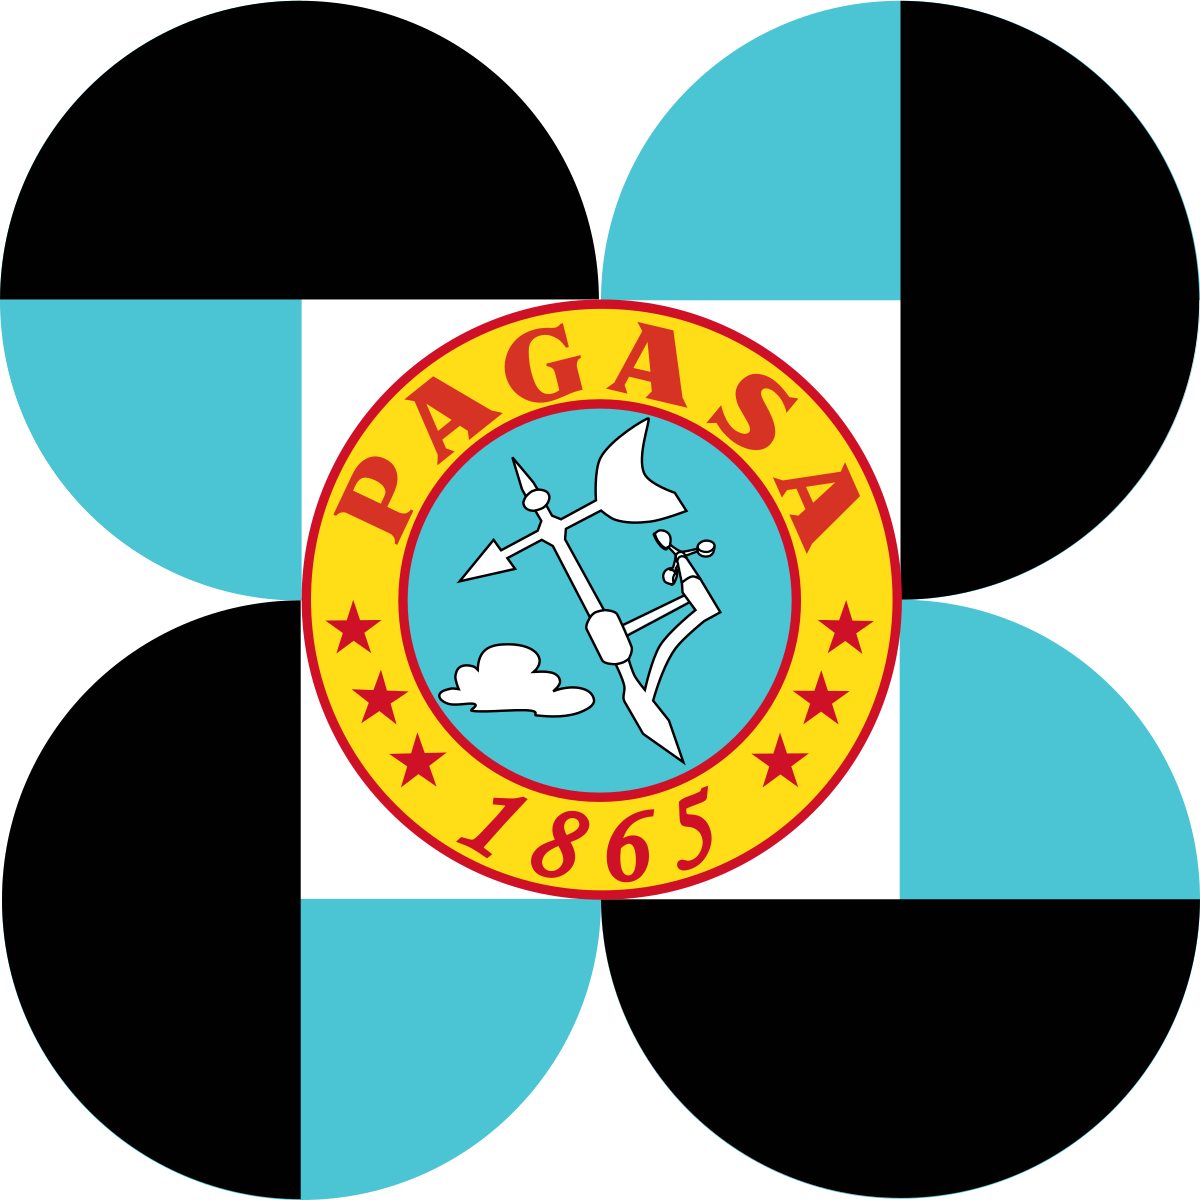 Philippine_Atmospheric,_Geophysical_and_Astronomical_Services_Administration_(PAGASA)_logo.png